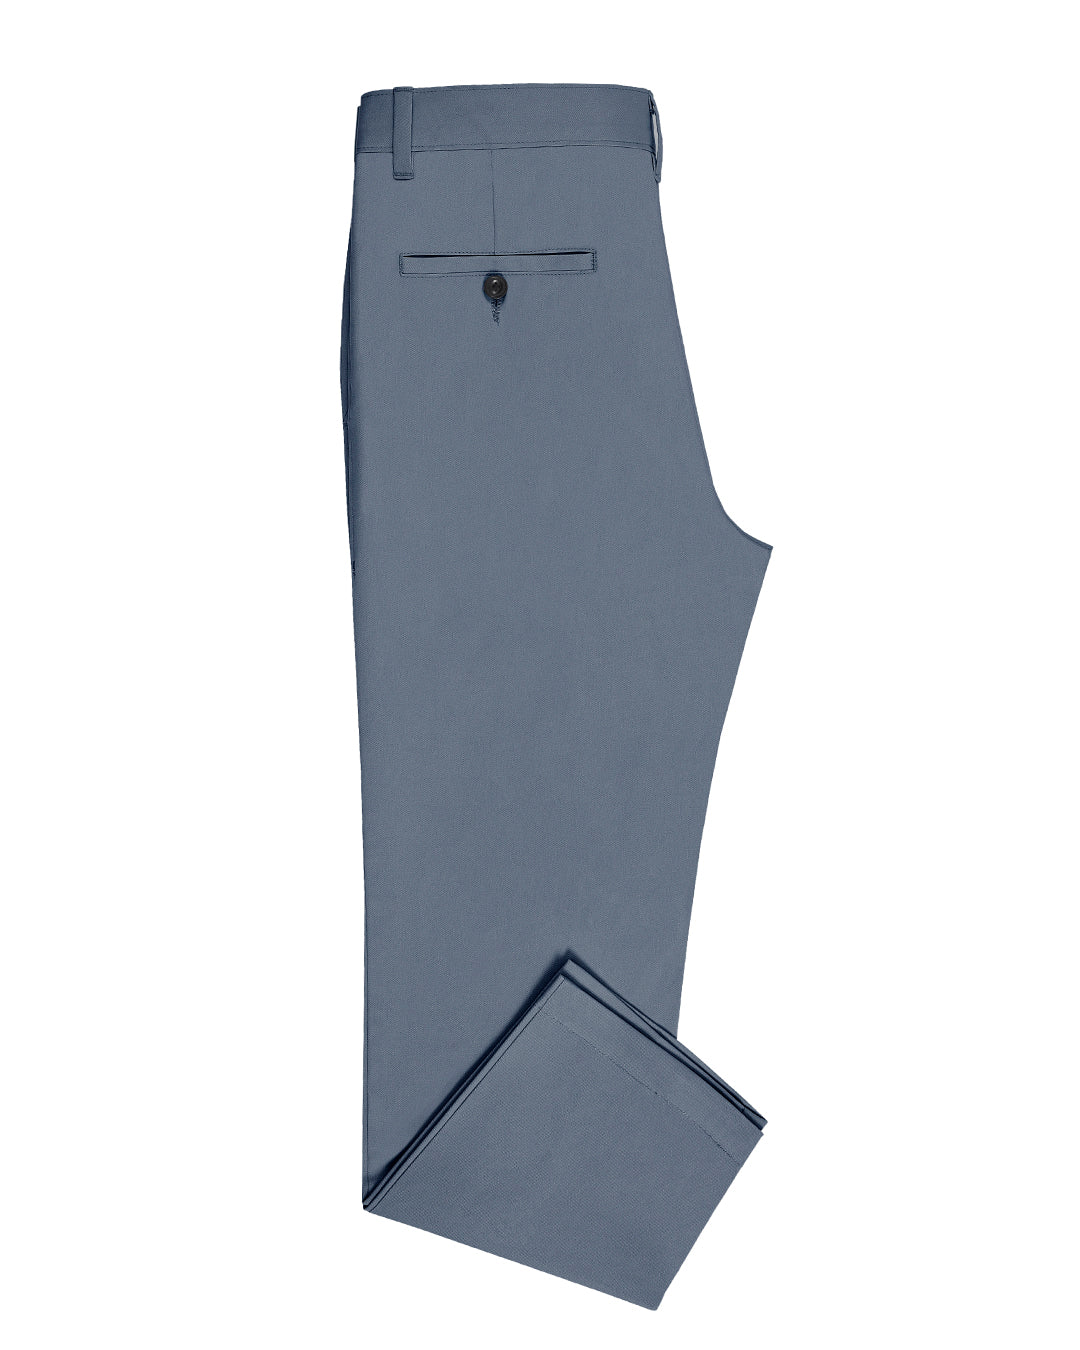 Side view of custom Genoa Chino pants for men by Luxire in blueish grey